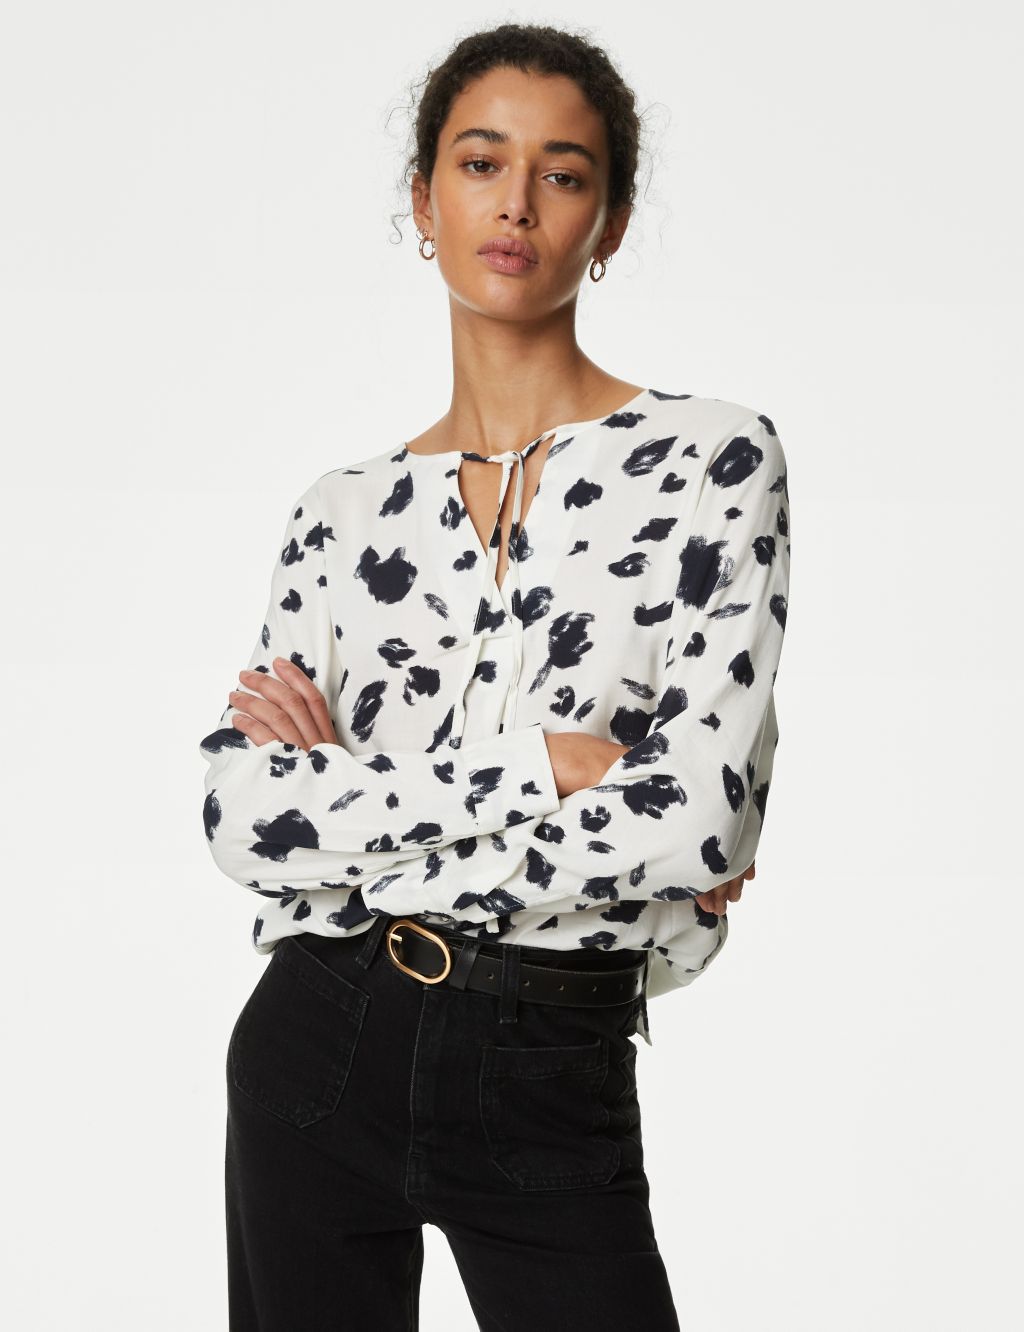 Page 3 - Women's Floral Shirts & Blouses